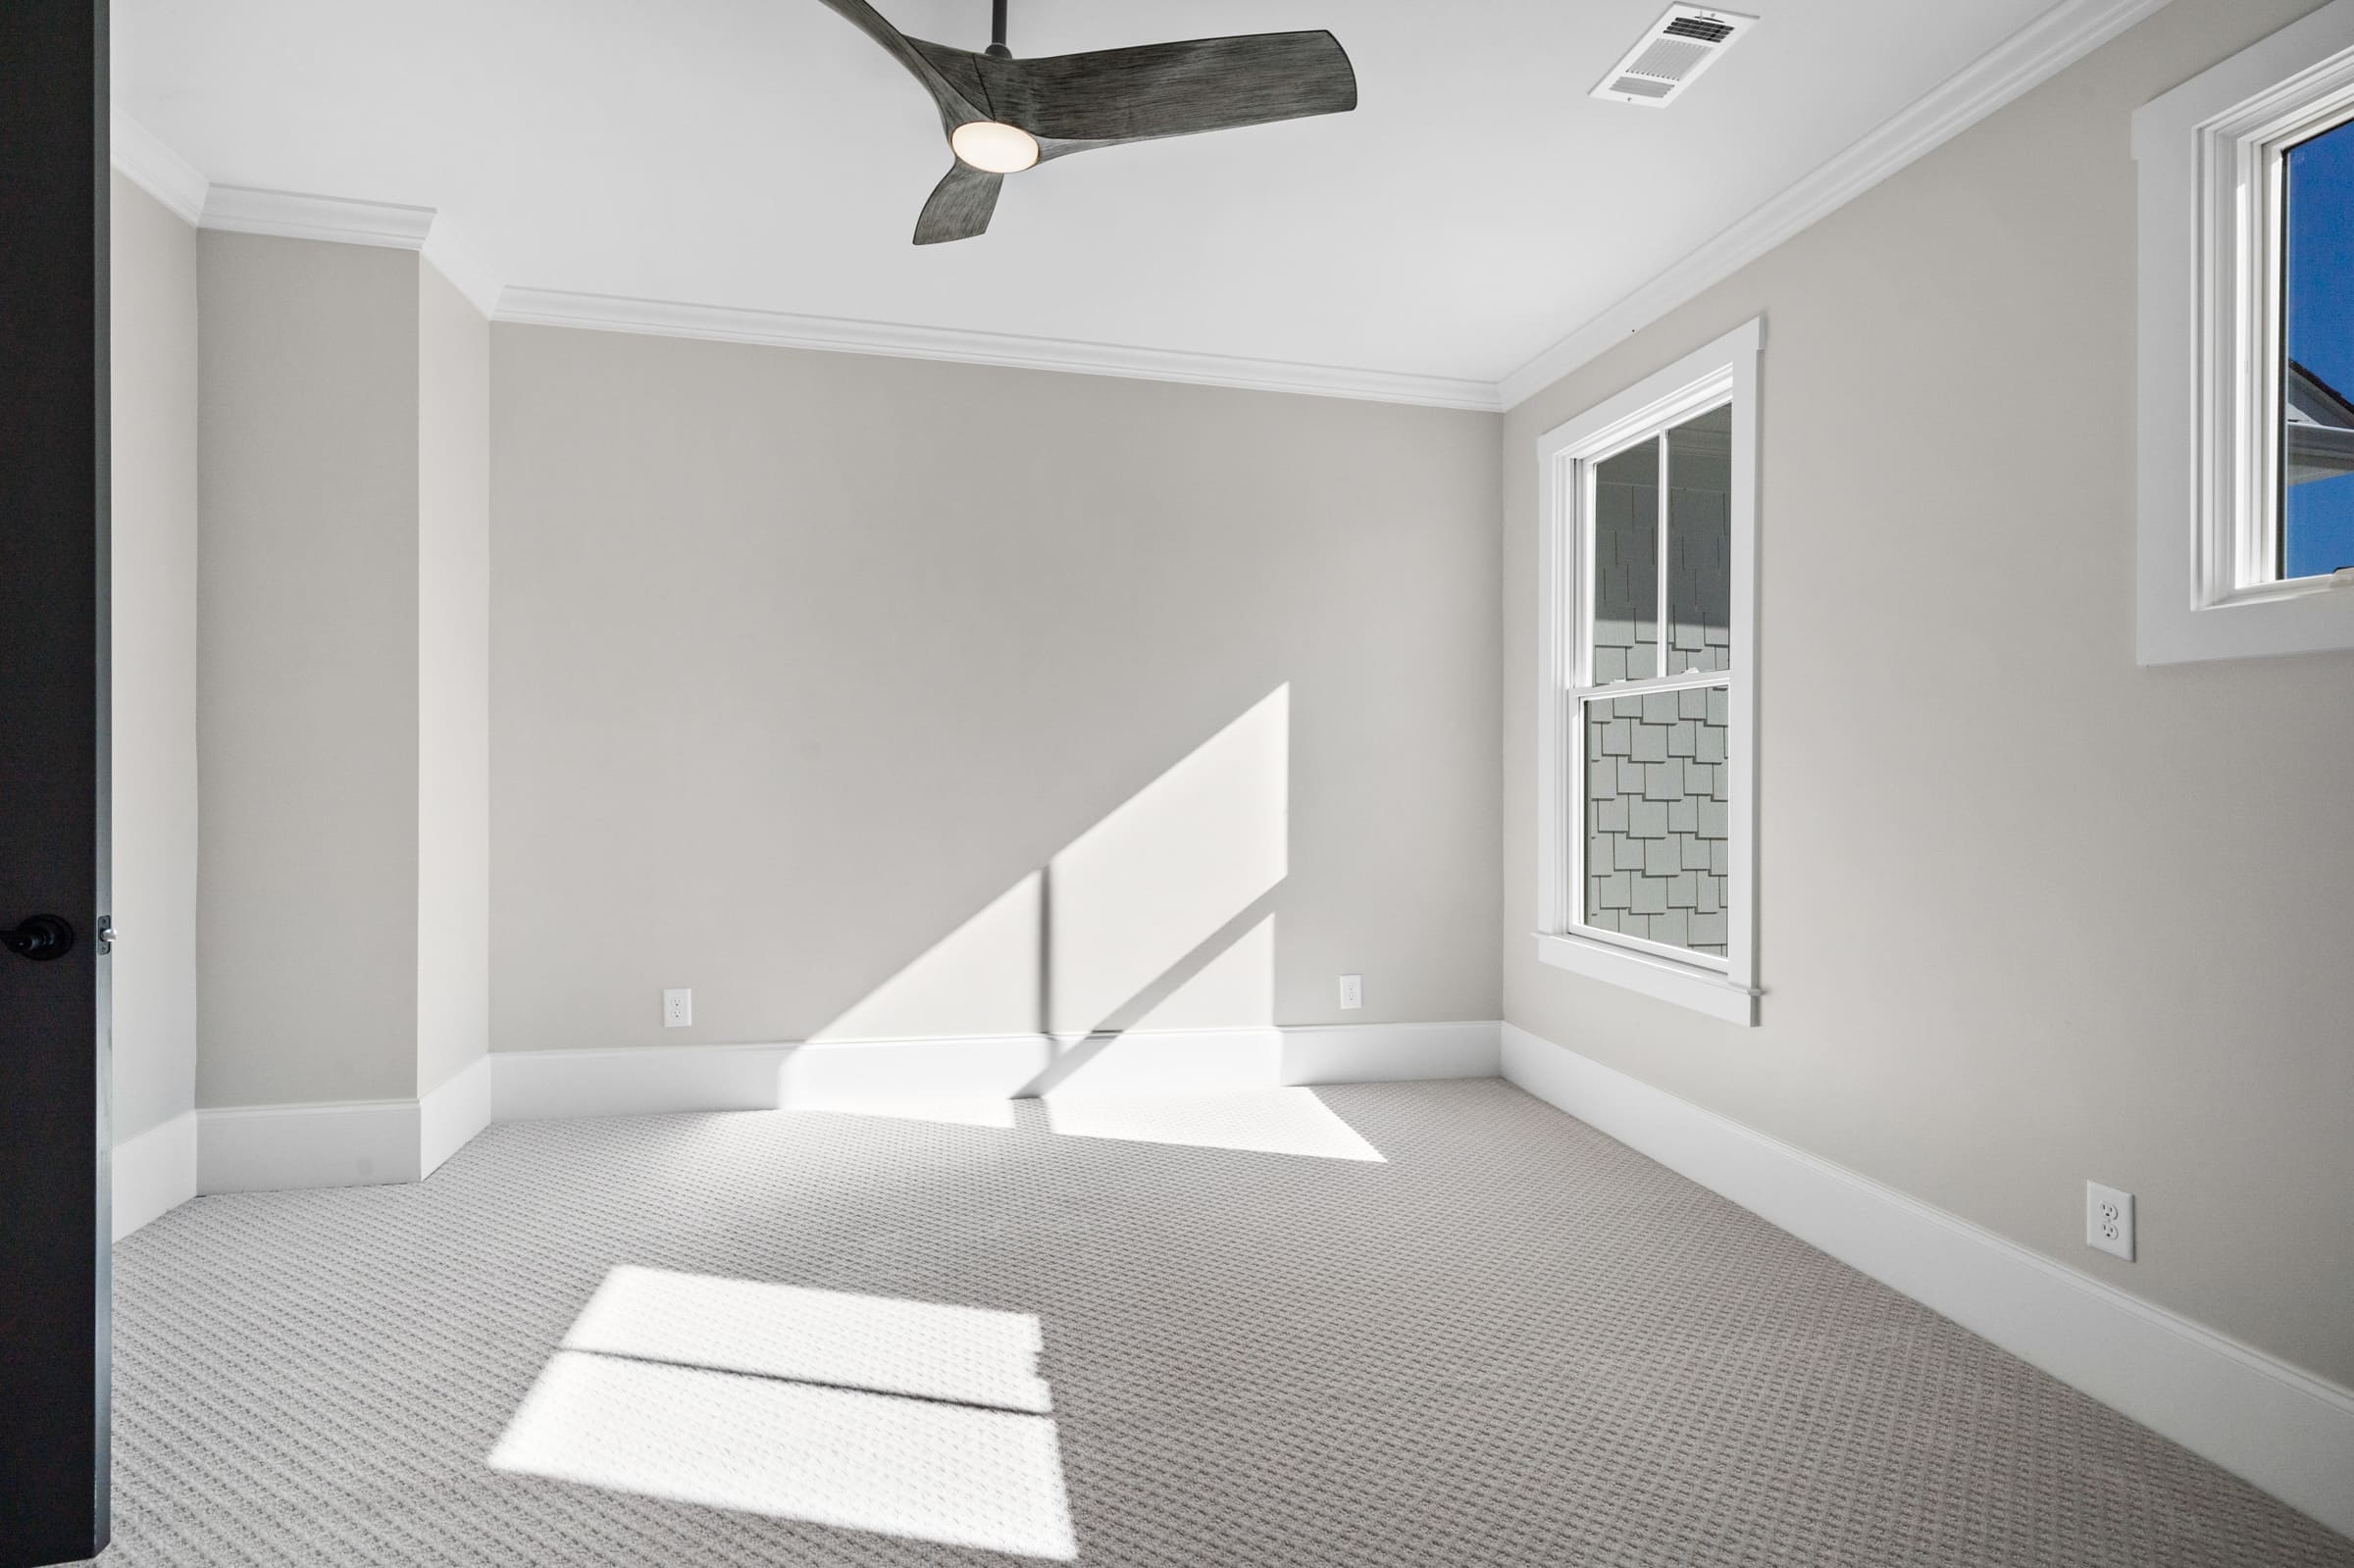 Carpeted Bedroom or Office with Two Windows and Dark Wood Ceiling Fan 